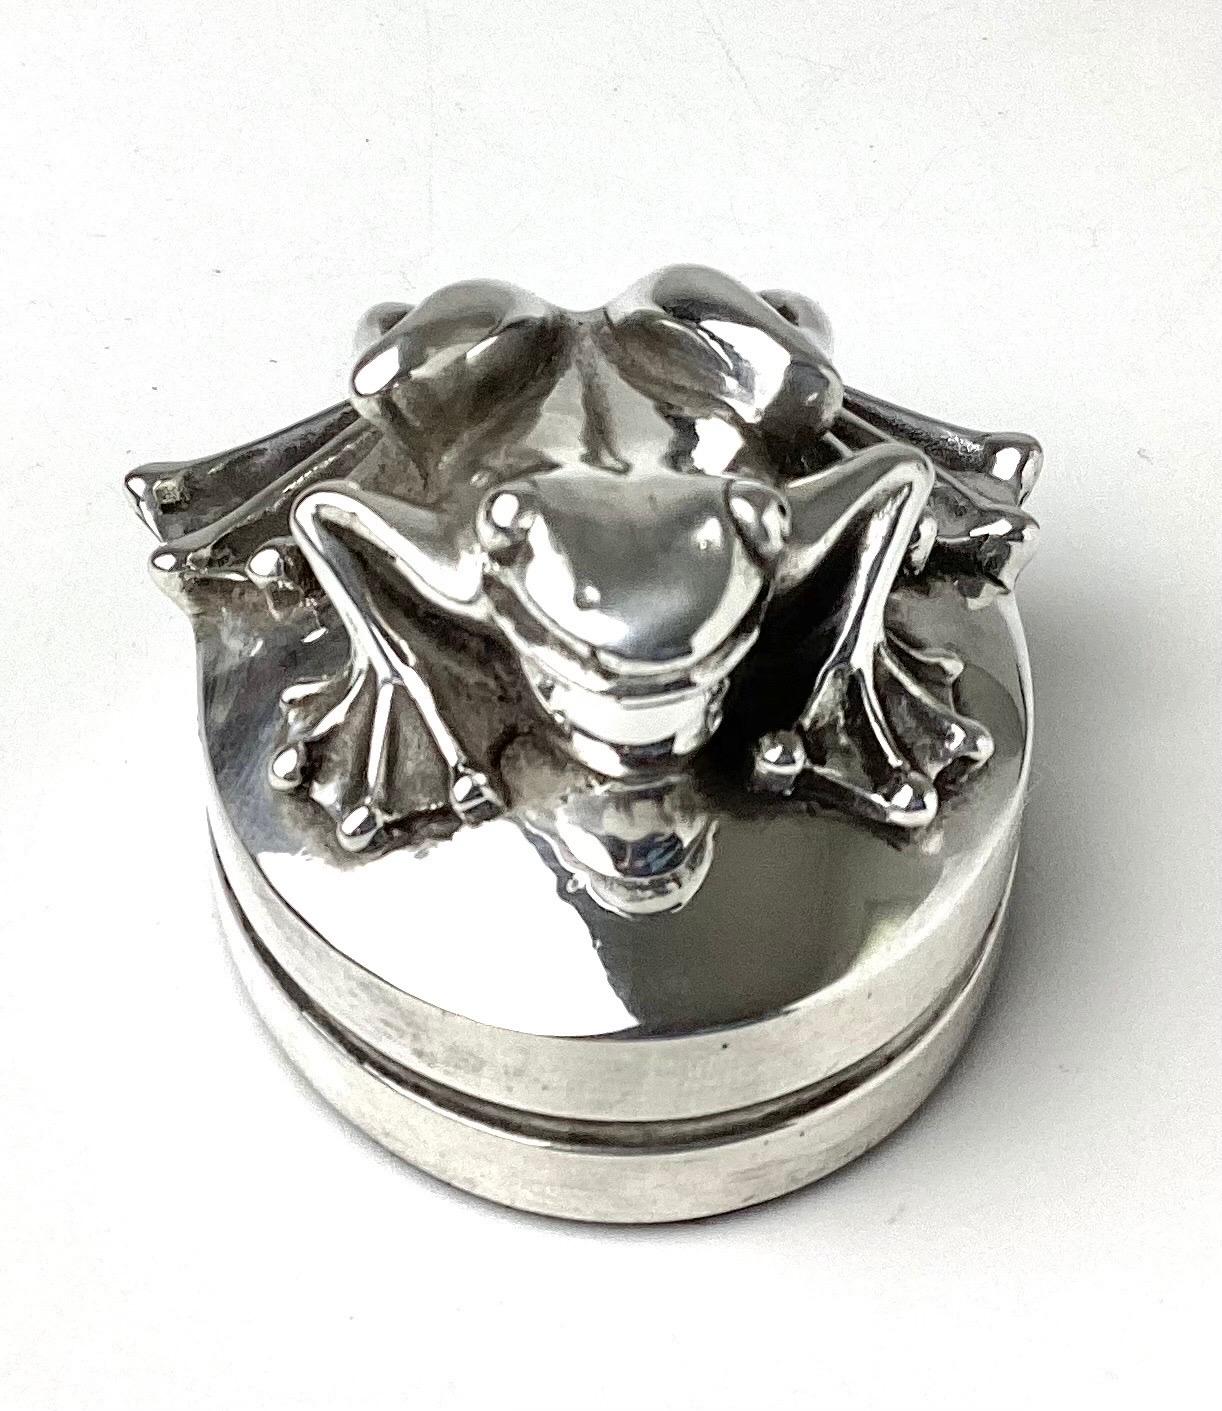 American 999 Pure Silver Repousse Frog / Toad Sculpture or Paperweight by Henryk Winograd